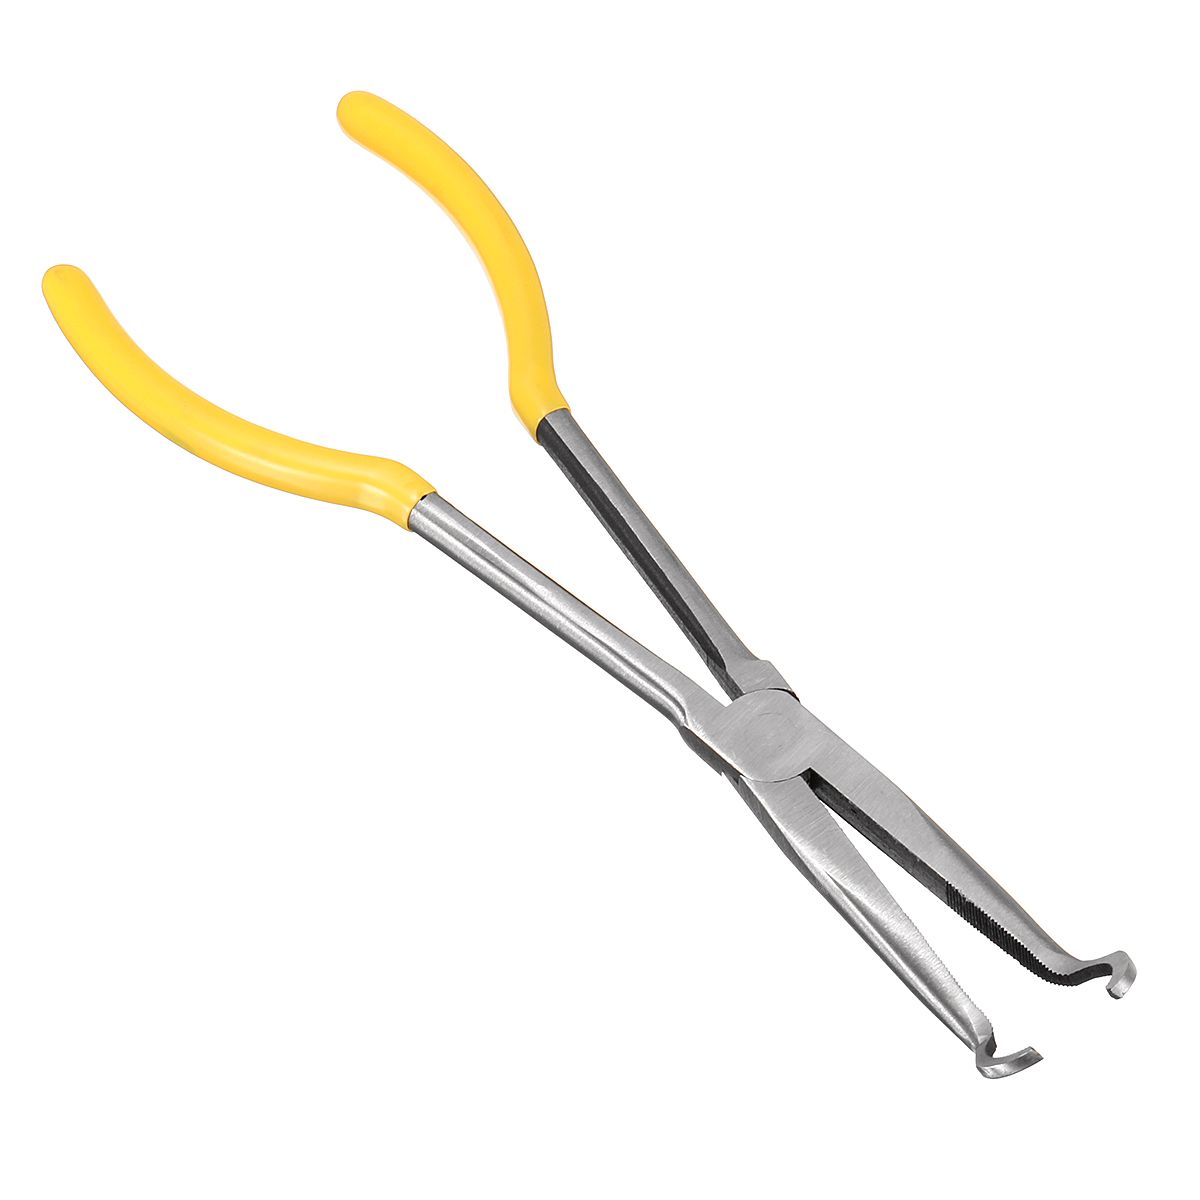 11-Long-Needle-Nose-Pliers-Straight-Wire-Cutter-Bent-Tip-Mechanics-Repair-Tool-1315589